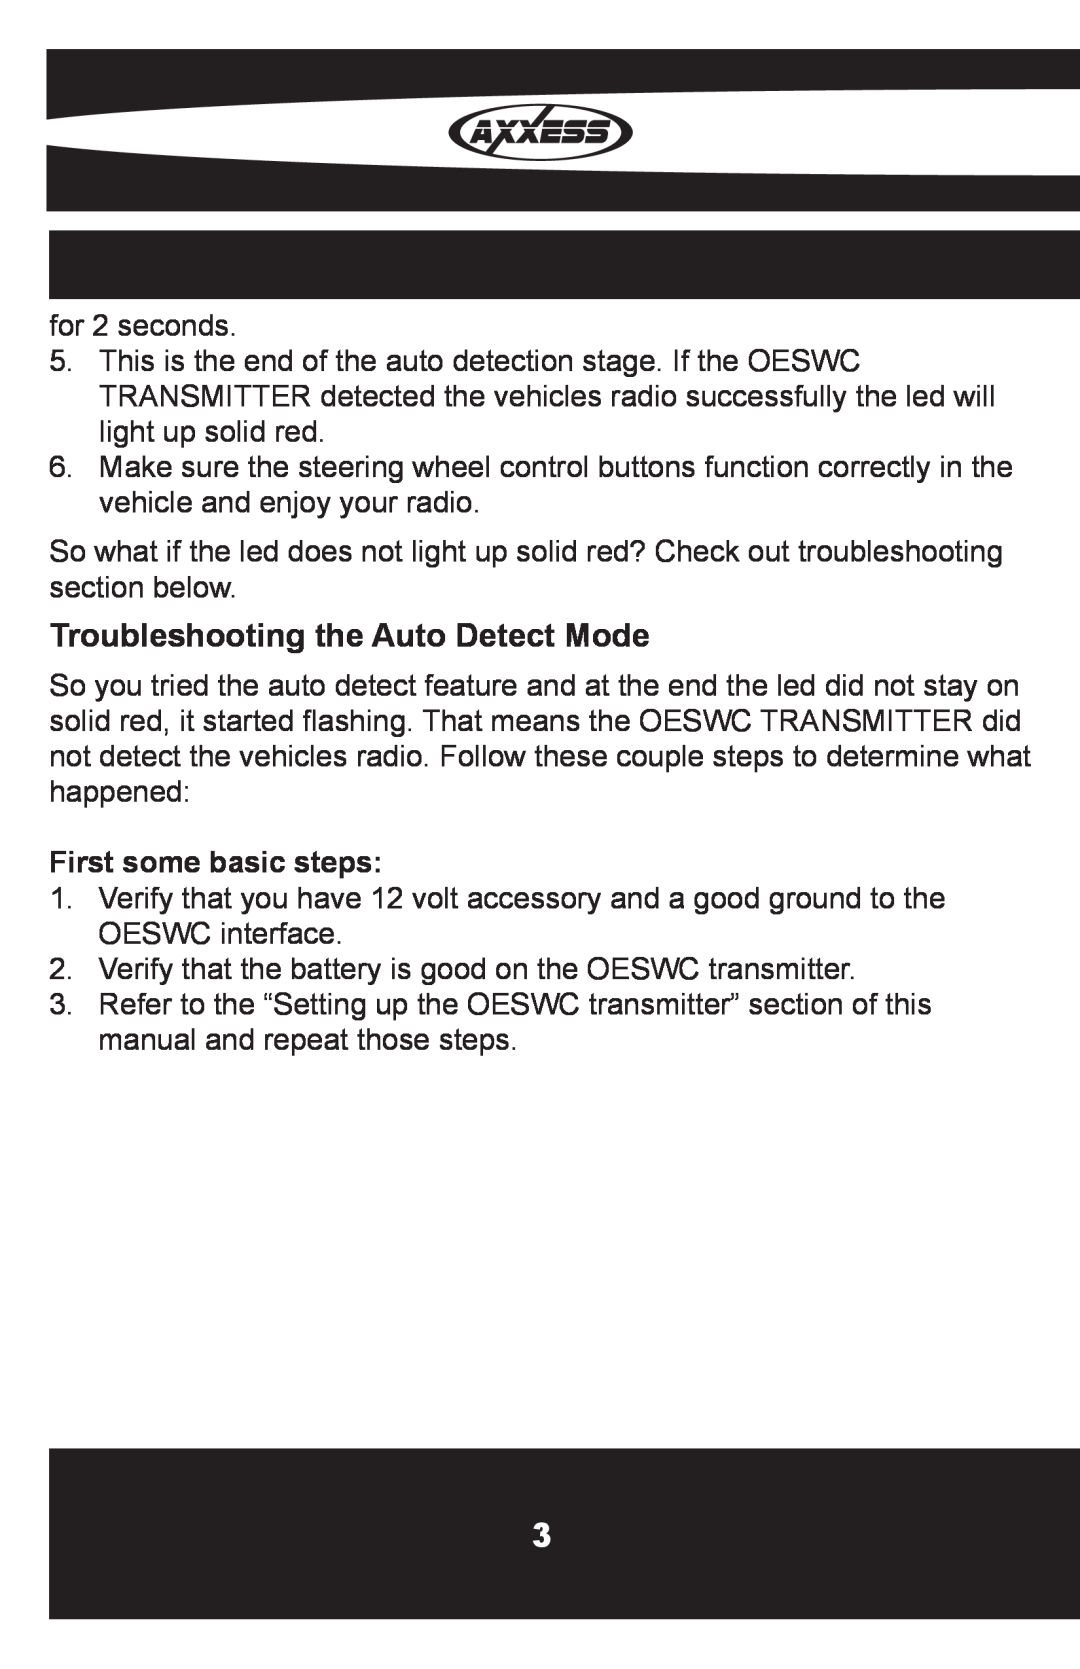 Axxess Interface OESWC-7552-RF installation instructions Troubleshooting the Auto Detect Mode, First some basic steps 